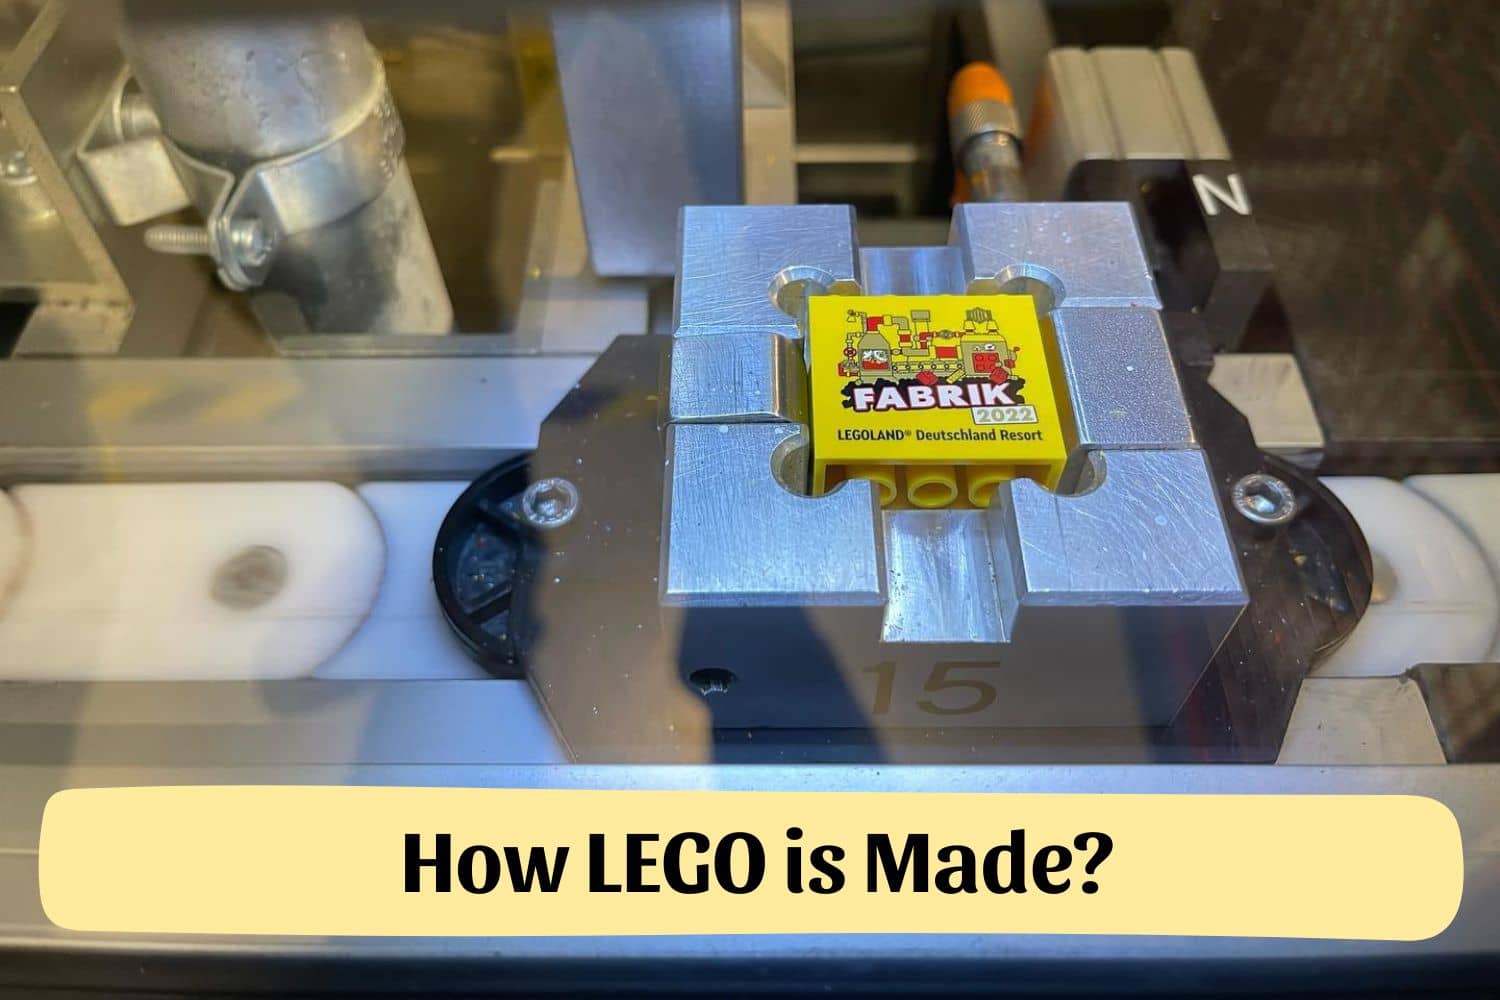 How LEGO is Made